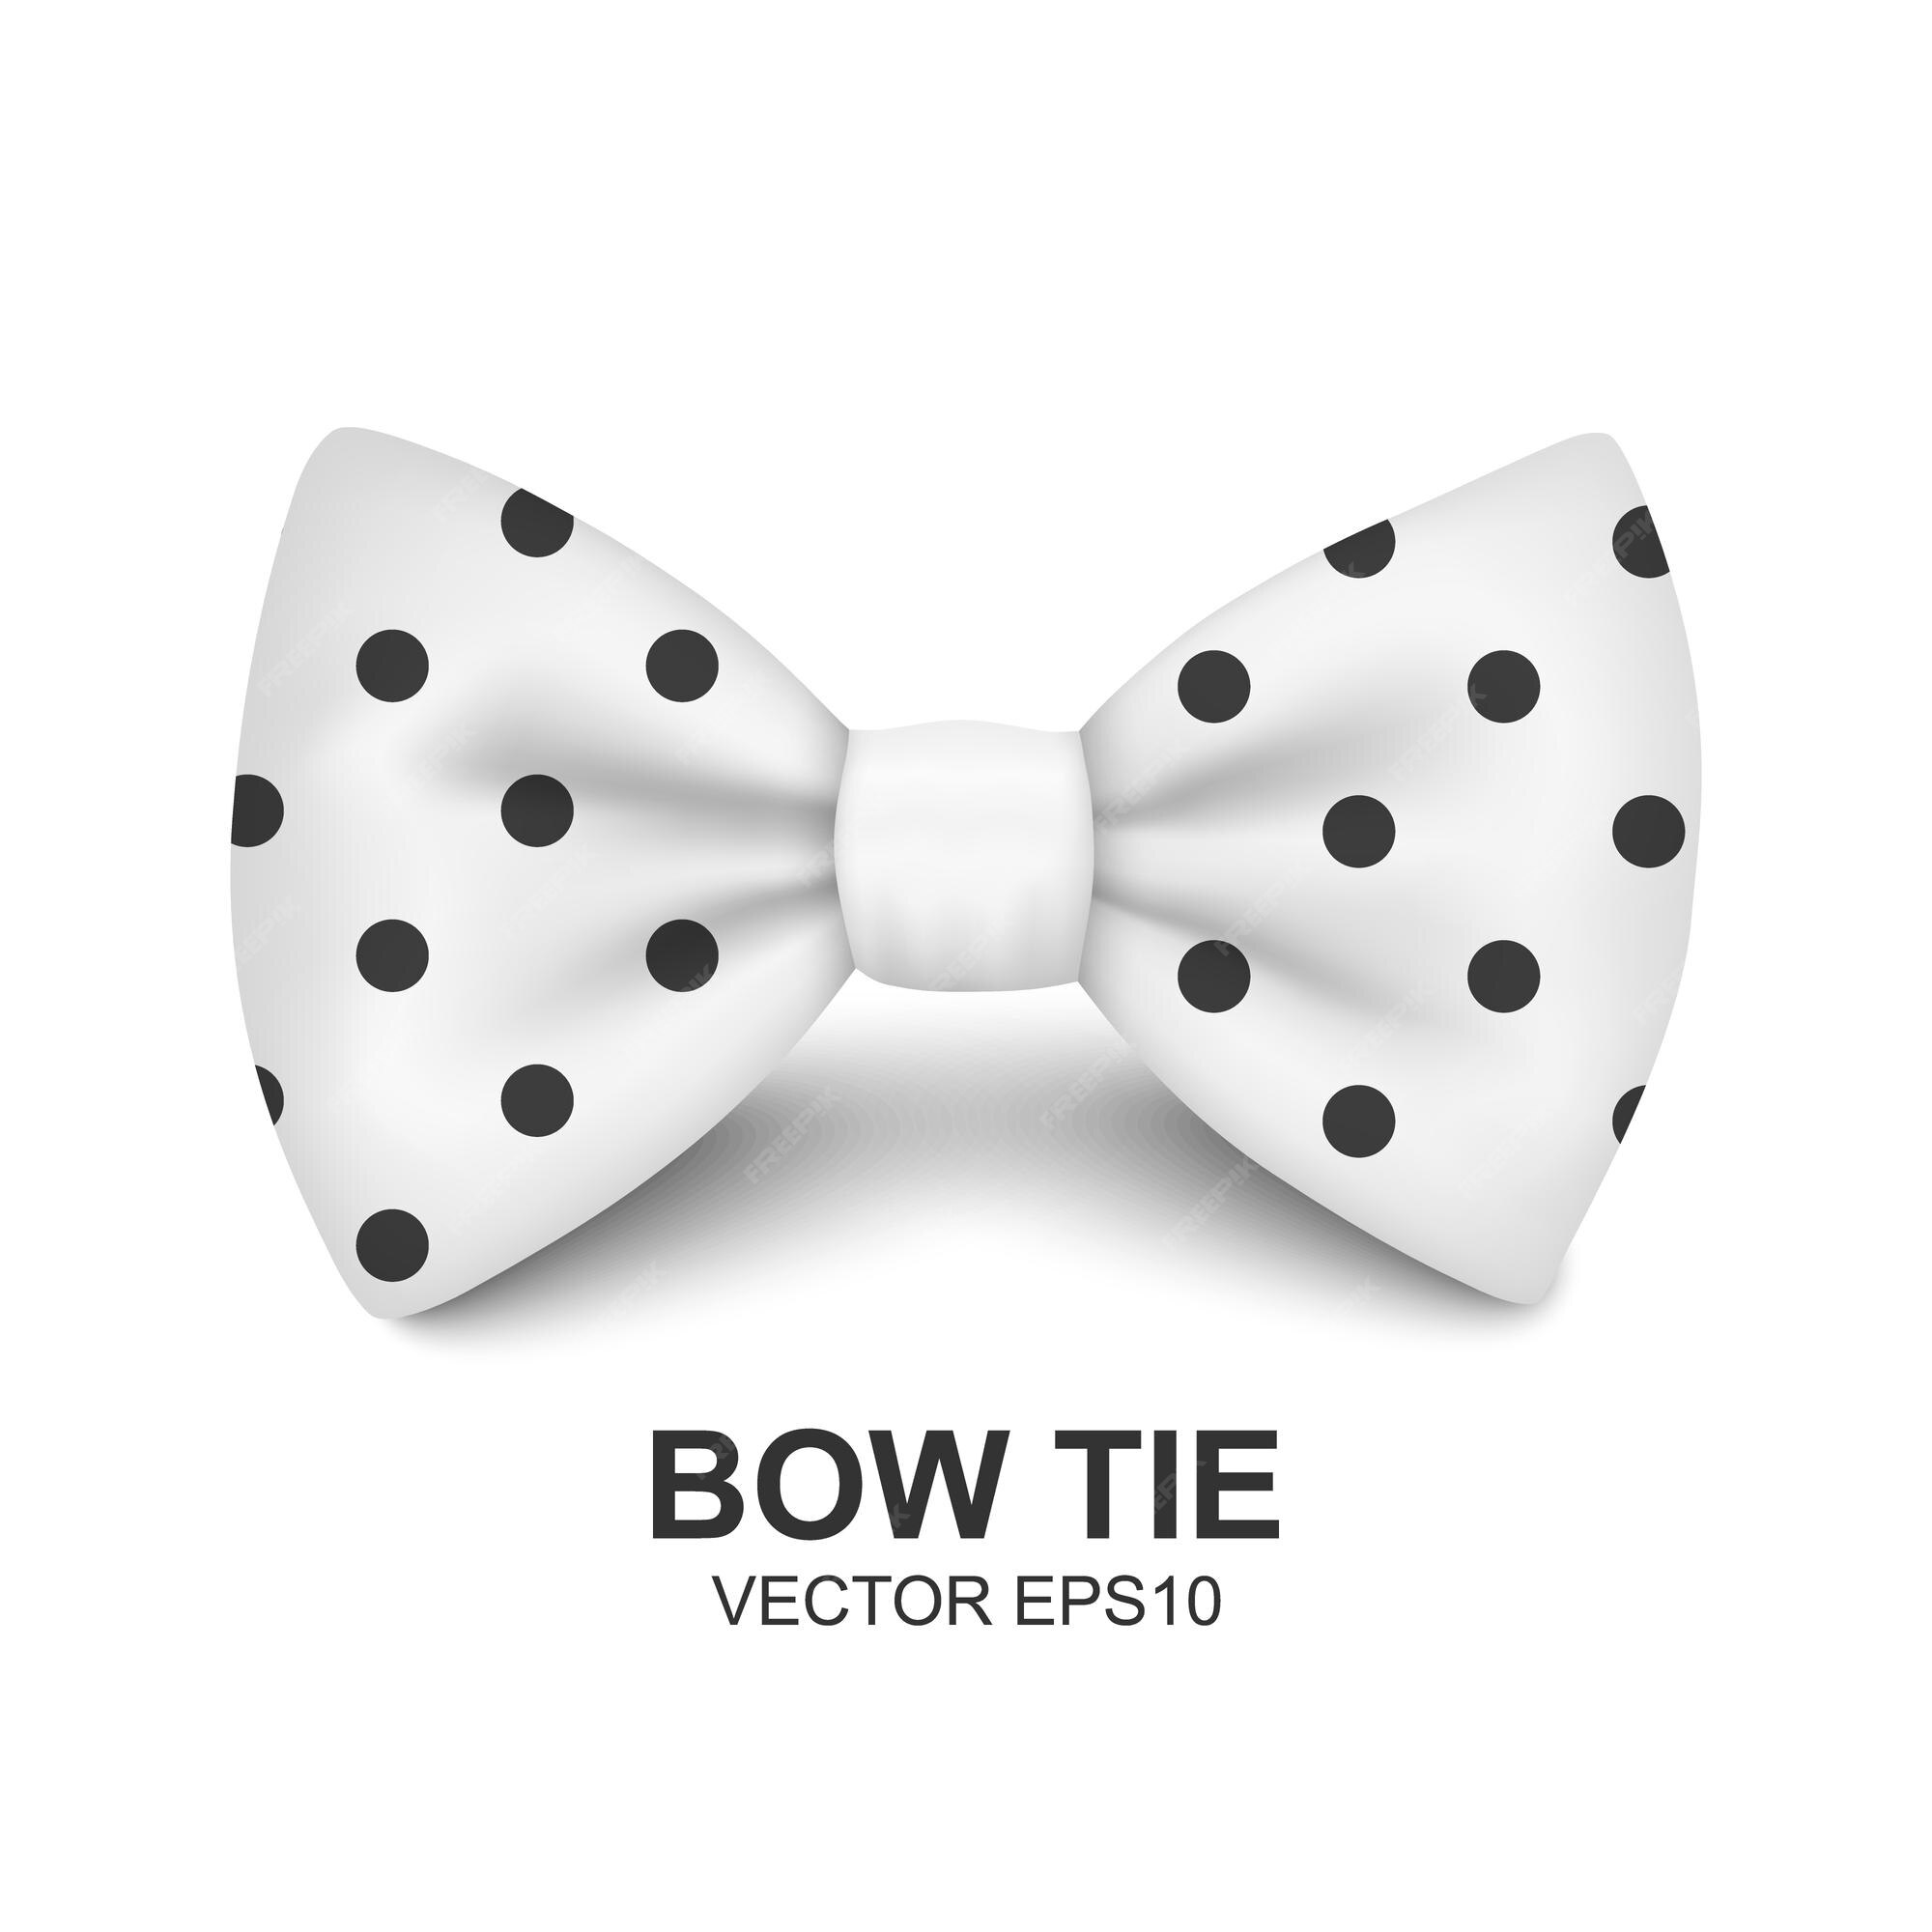 Premium Vector  Bow tie isolated on white background